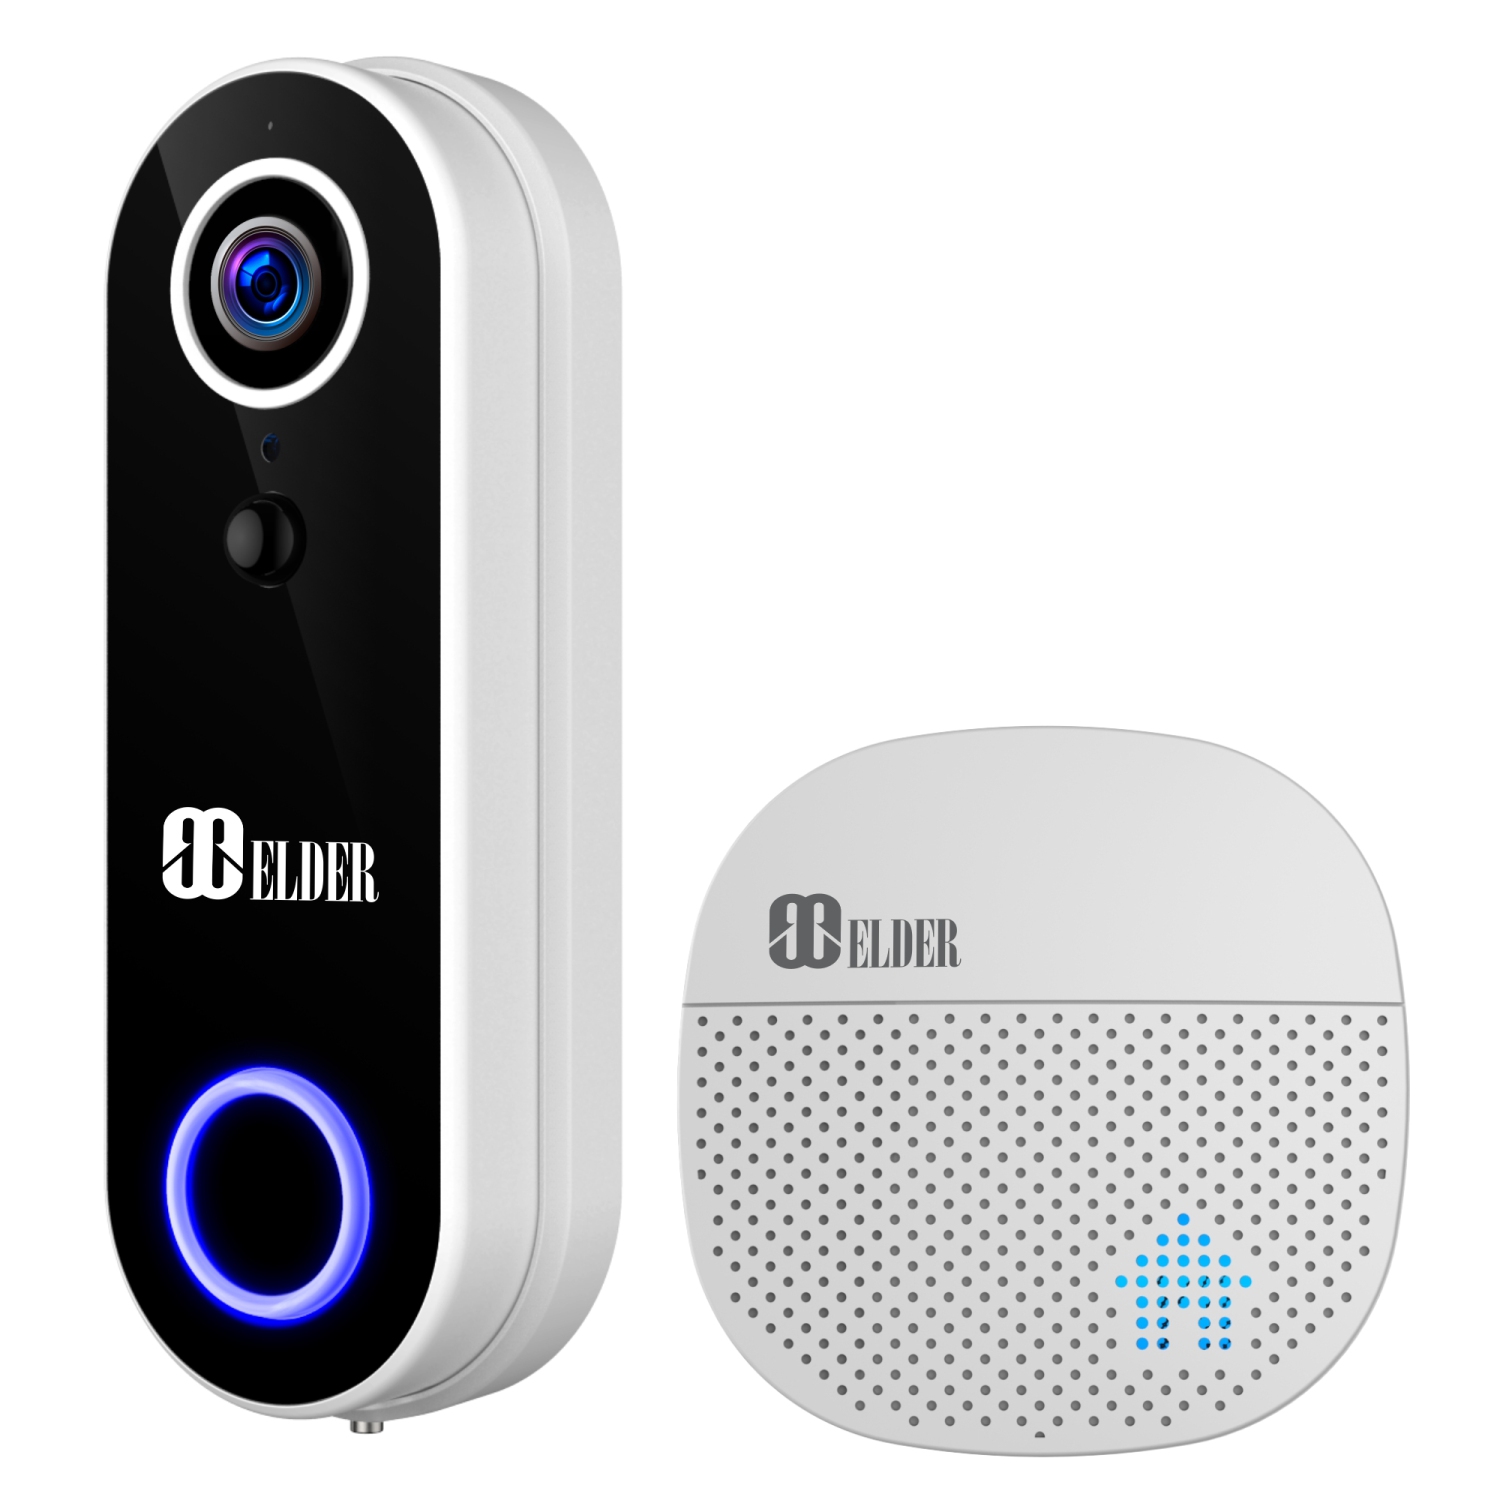 Elder Doorbell Camera Wireless 32GB WiFi Battery-Powered & Chime, Smart Home AI Human Detection PIR Motion & DIY Video Doorbell, Works with Google Assistant & Alexa